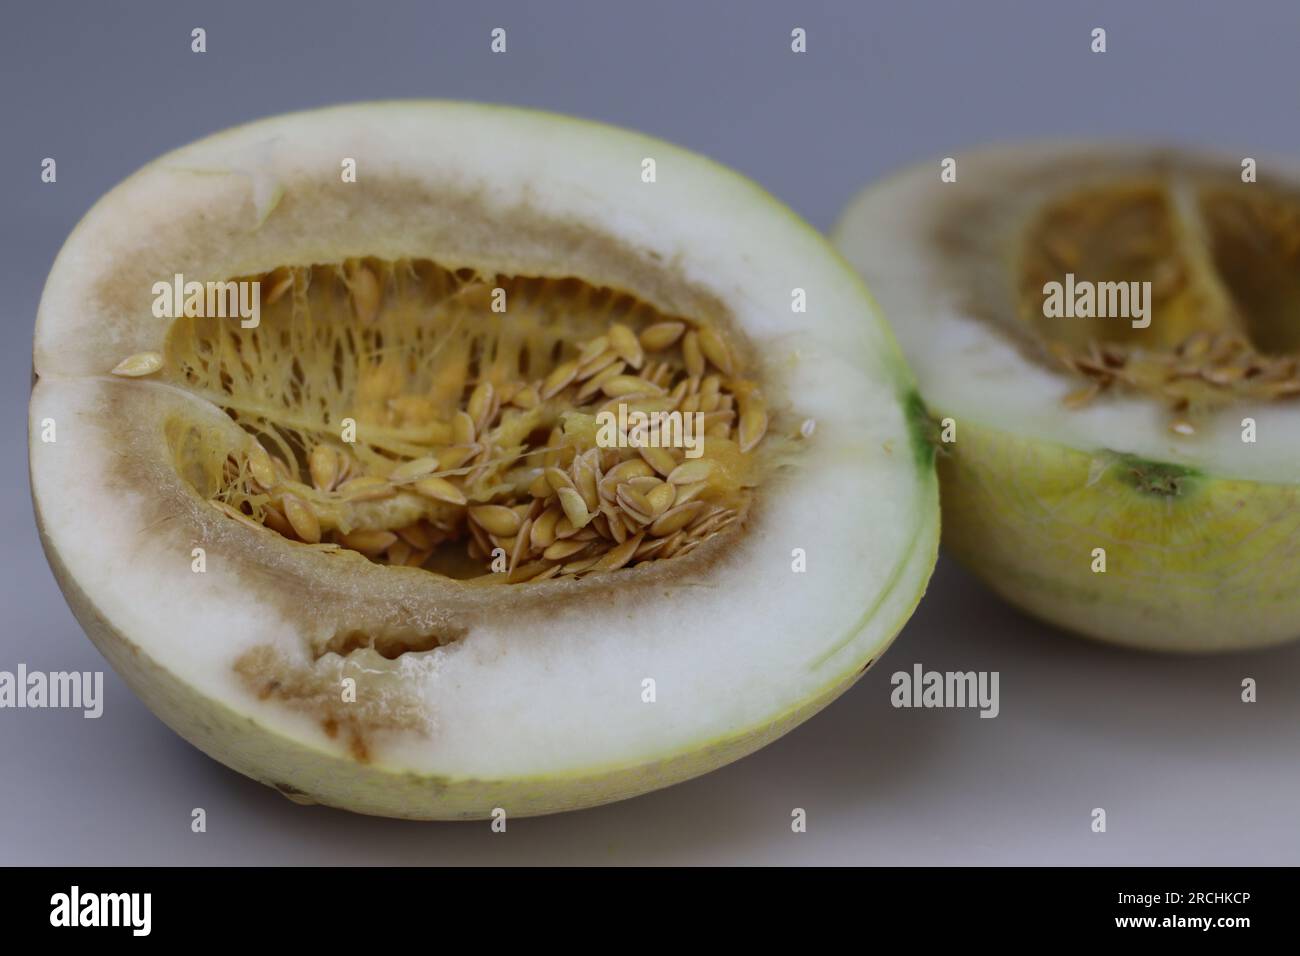 Decomposed or rotten honeydew melon. Cross section of the honeydew melon with its rotten or spoiled flesh. Honeydew Melon is one of the two main culti Stock Photo